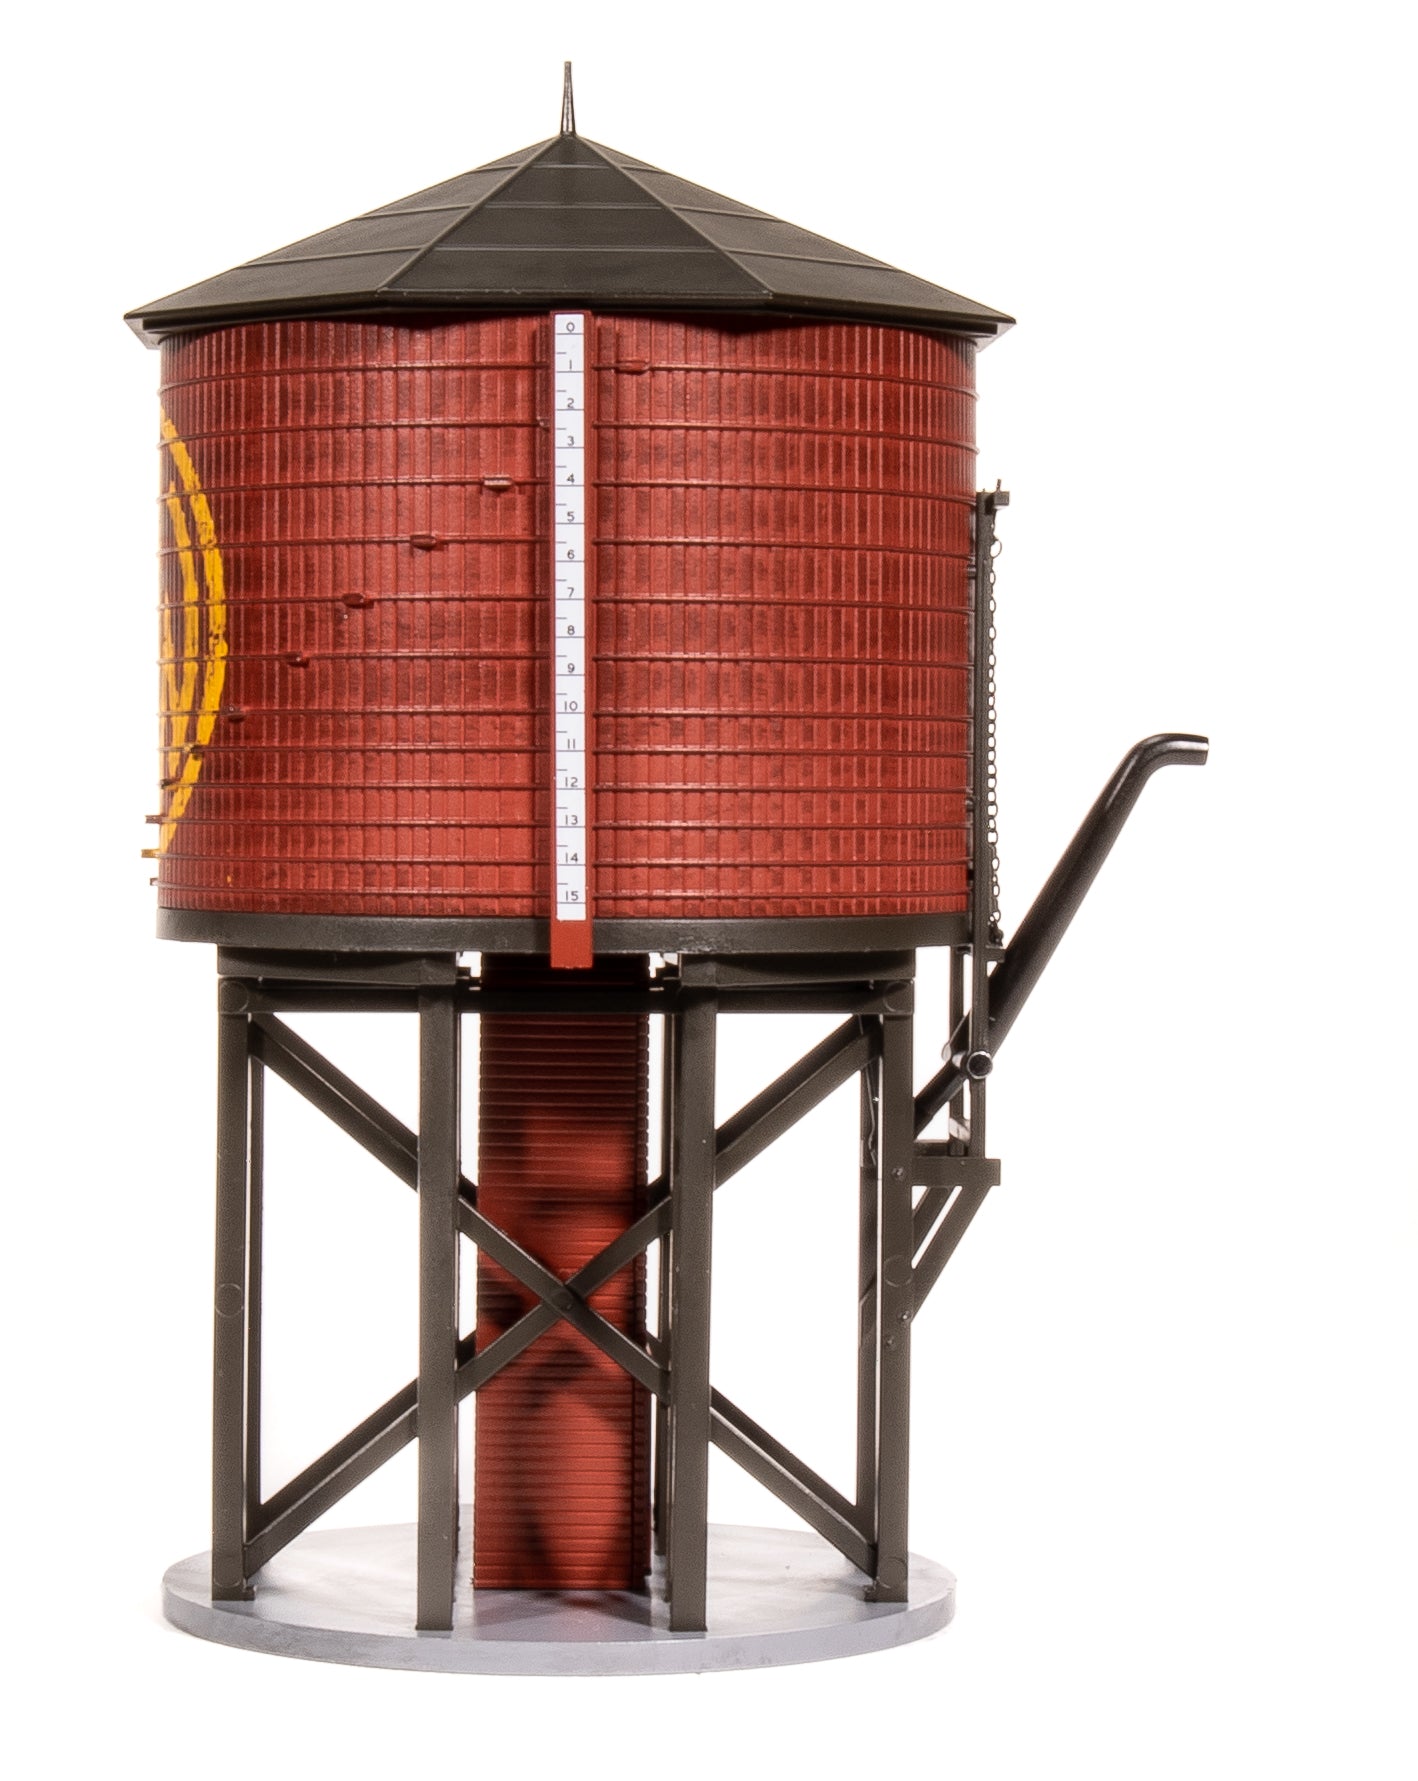 7920 Operating Water Tower w/ Sound, N&W, Weathered, HO Default Title